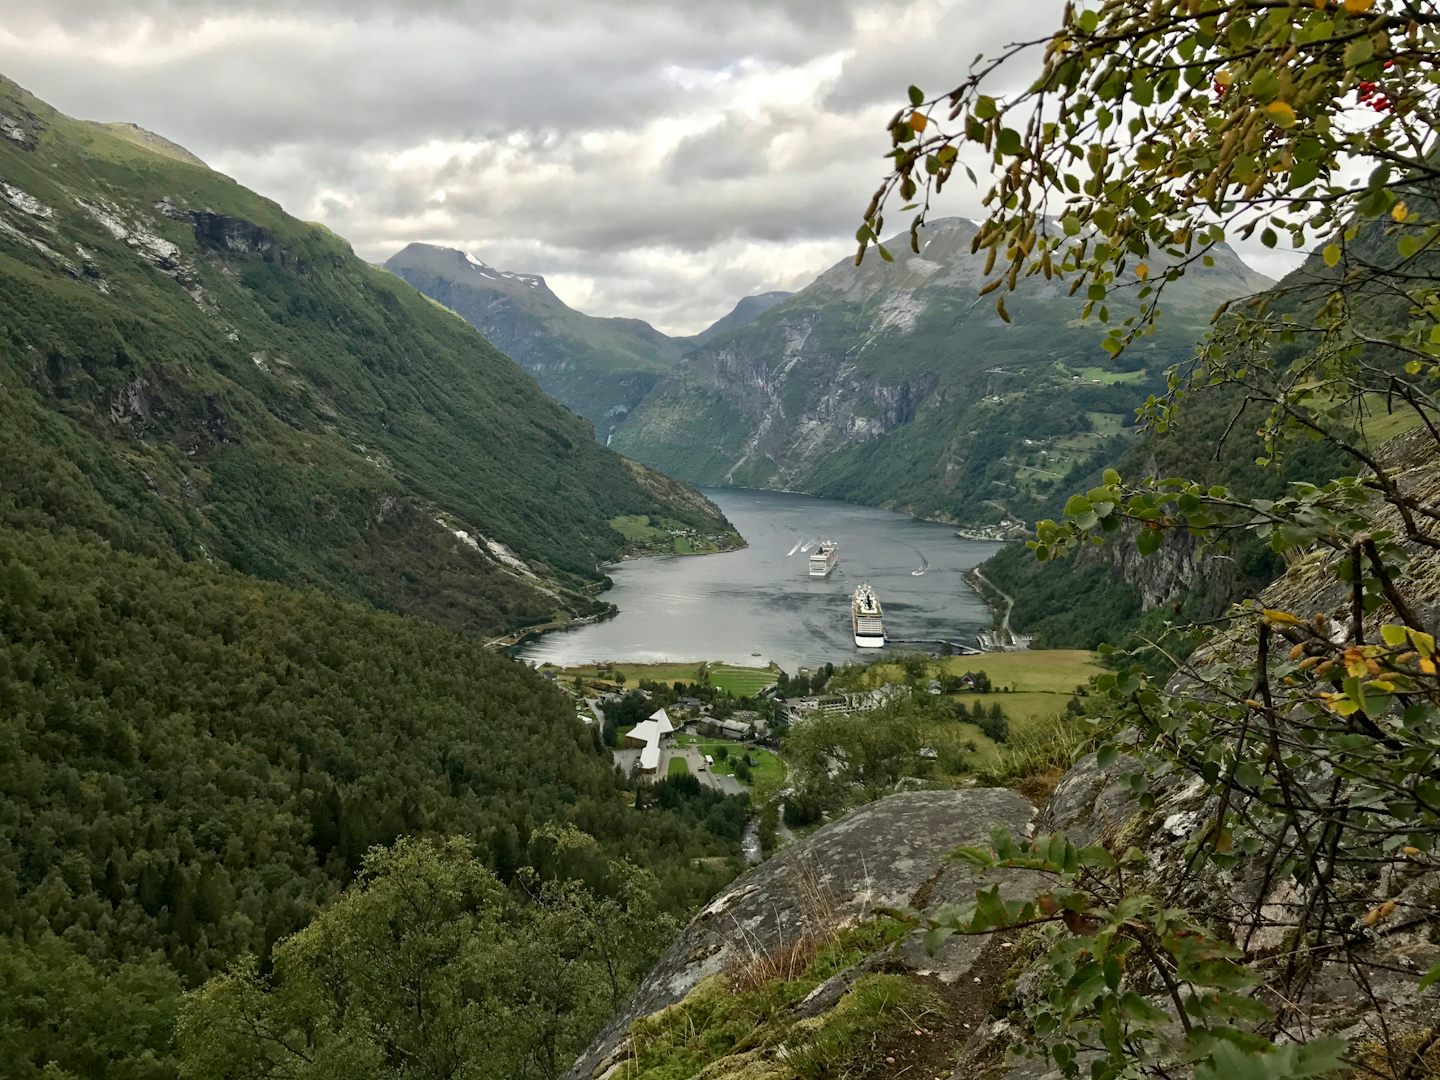 Taken on an excursion from Geiranger back toward the port of Geiranger.